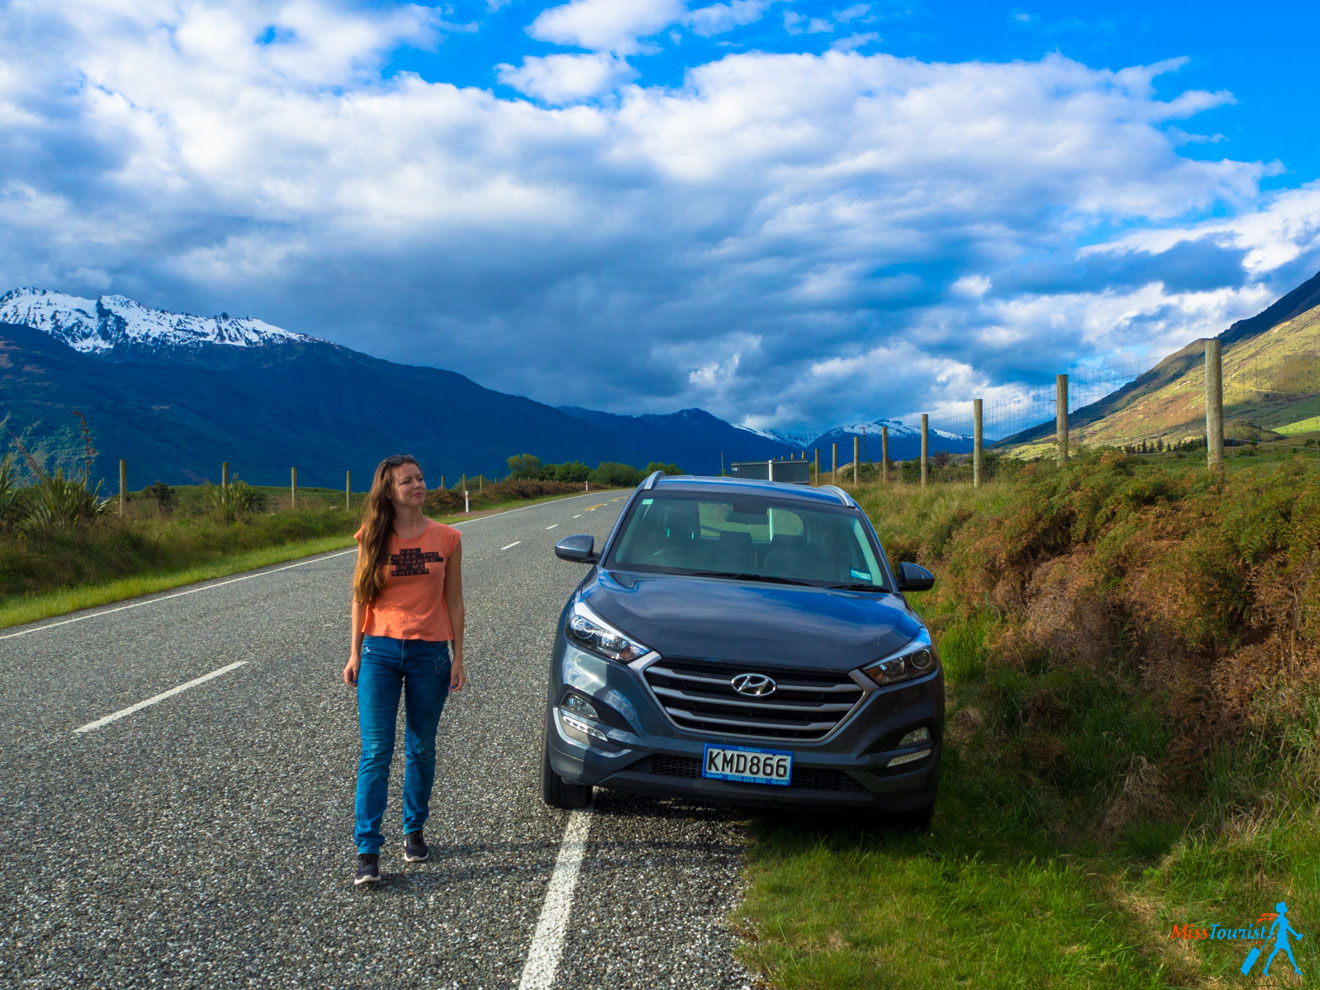 7 things you should know before renting a car in New Zealand 7